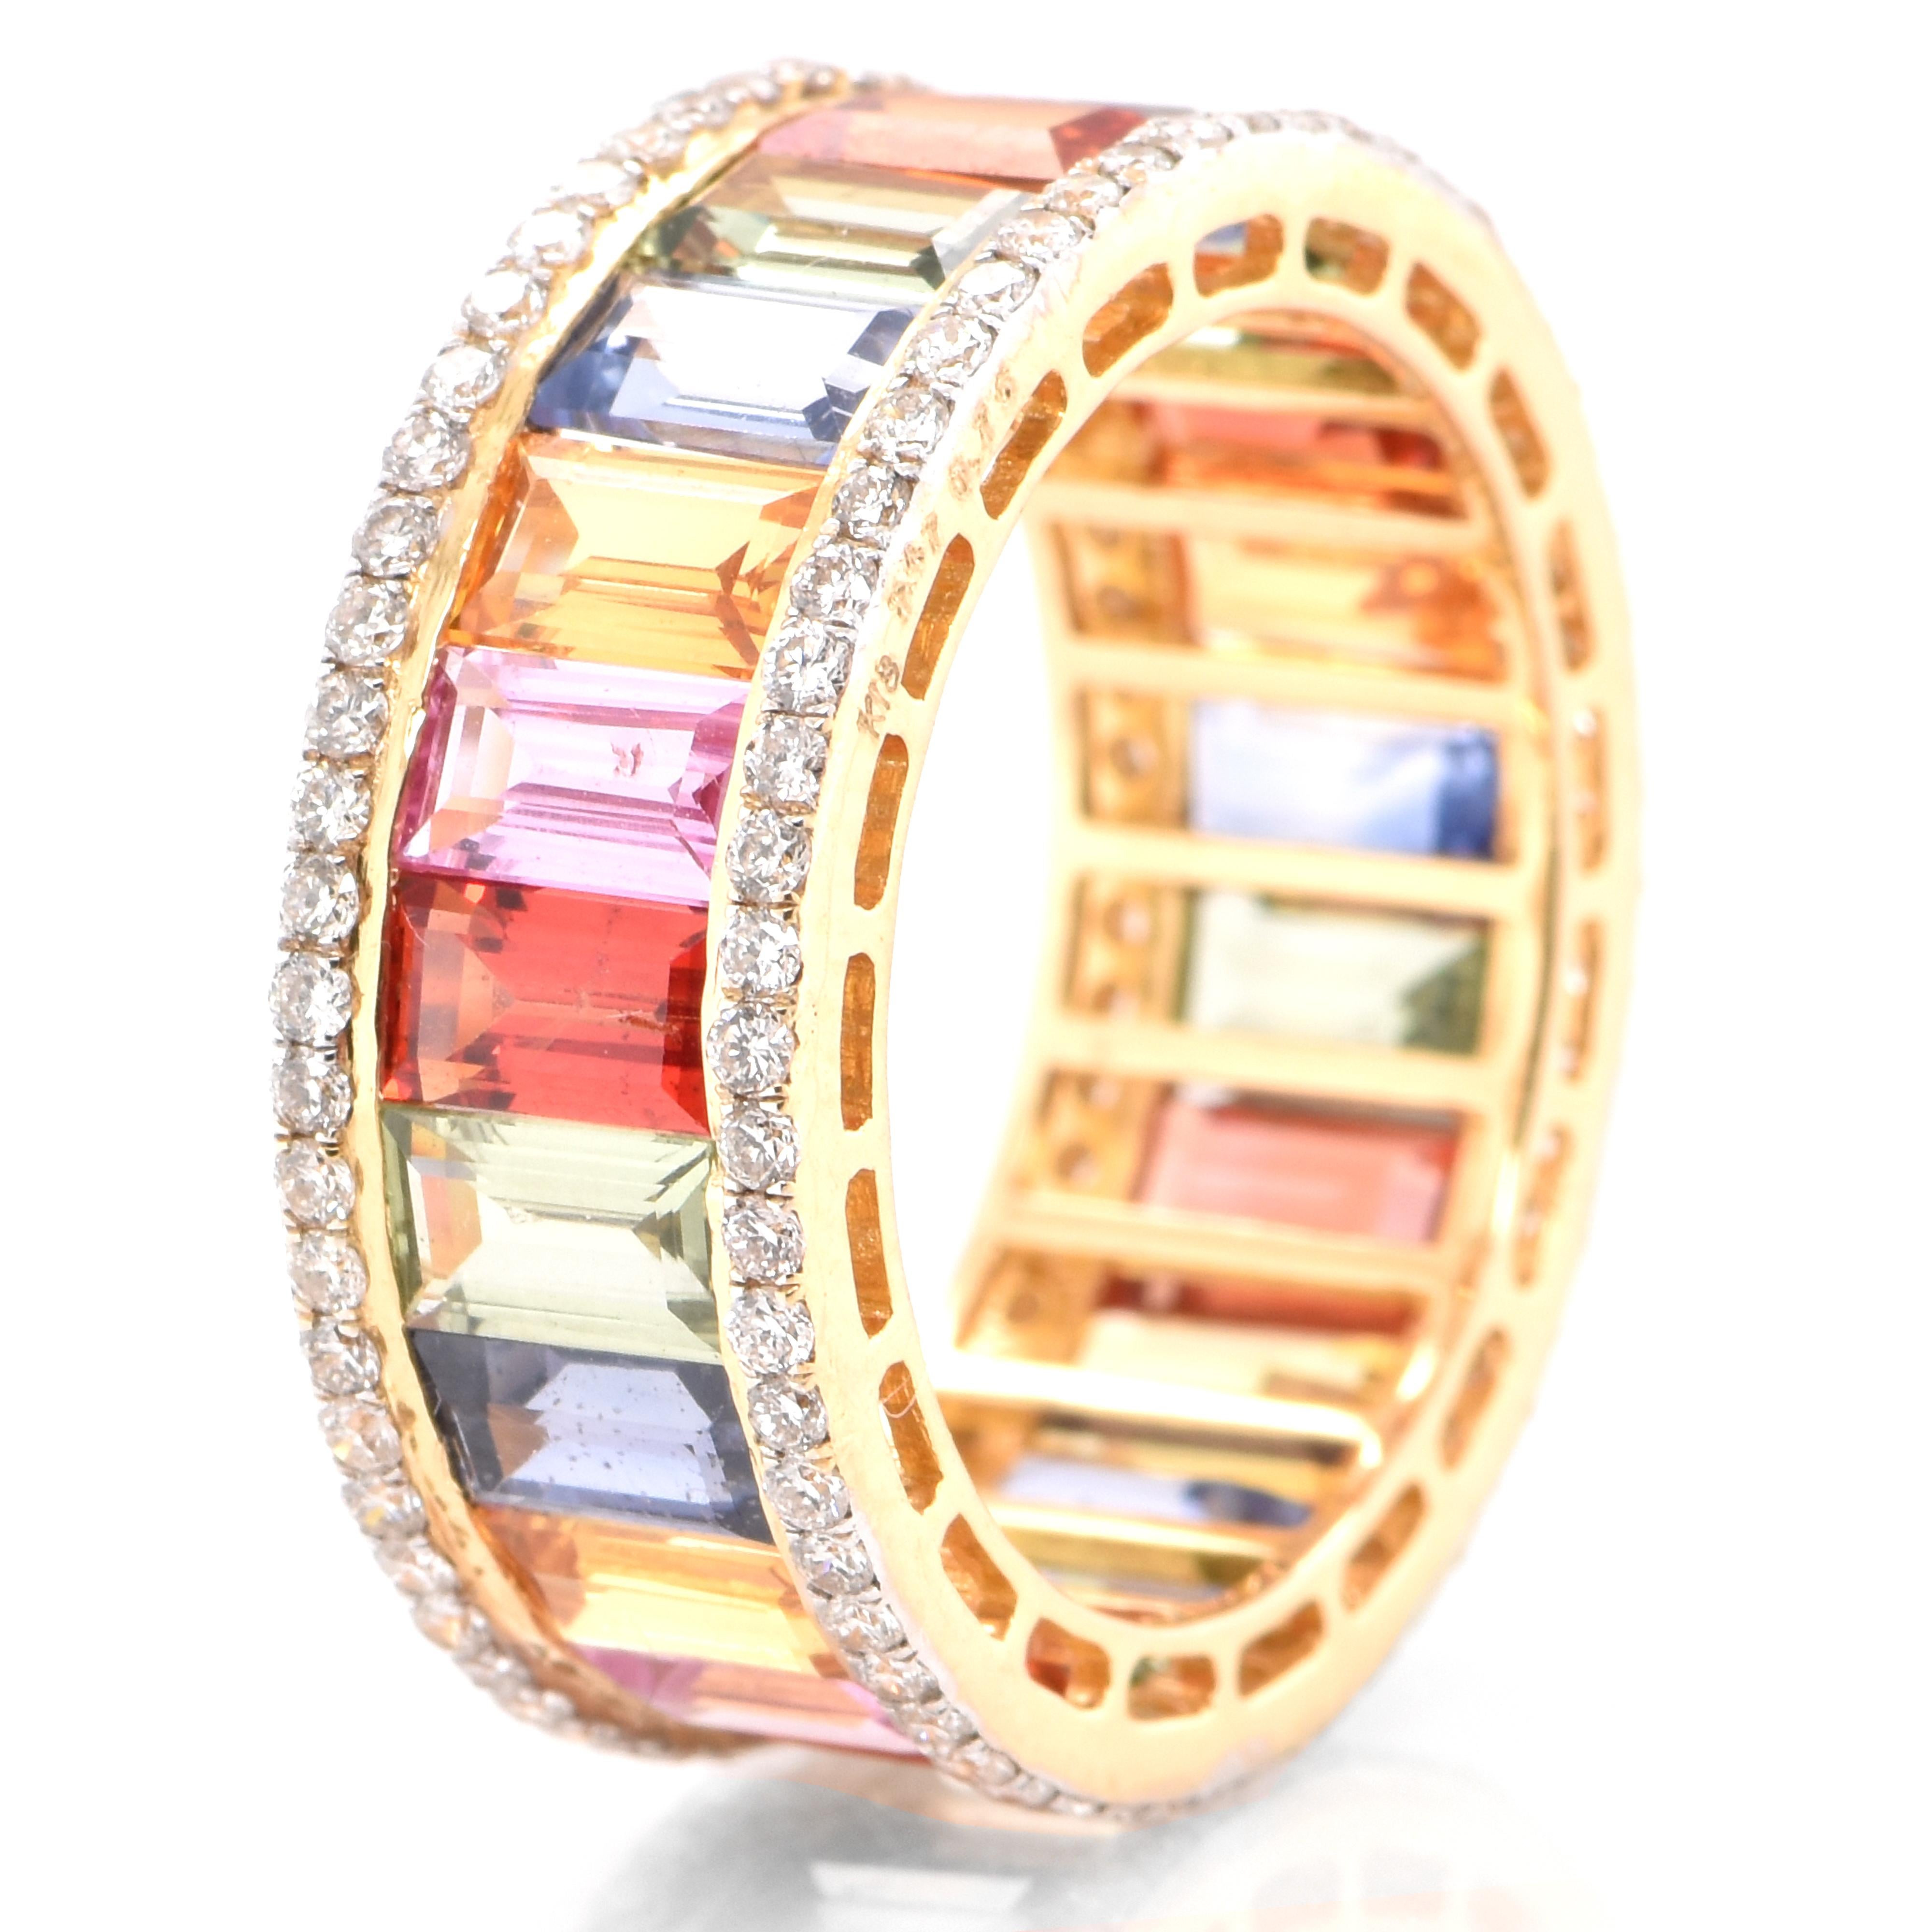 A beautiful ring featuring 7.47 Carats of Multi Colored Sapphires and 0.76 Carats Diamond Accents set in 18 Karat Yellow Gold. Sapphires have extraordinary durability - they excel in hardness as well as toughness and durability making them very